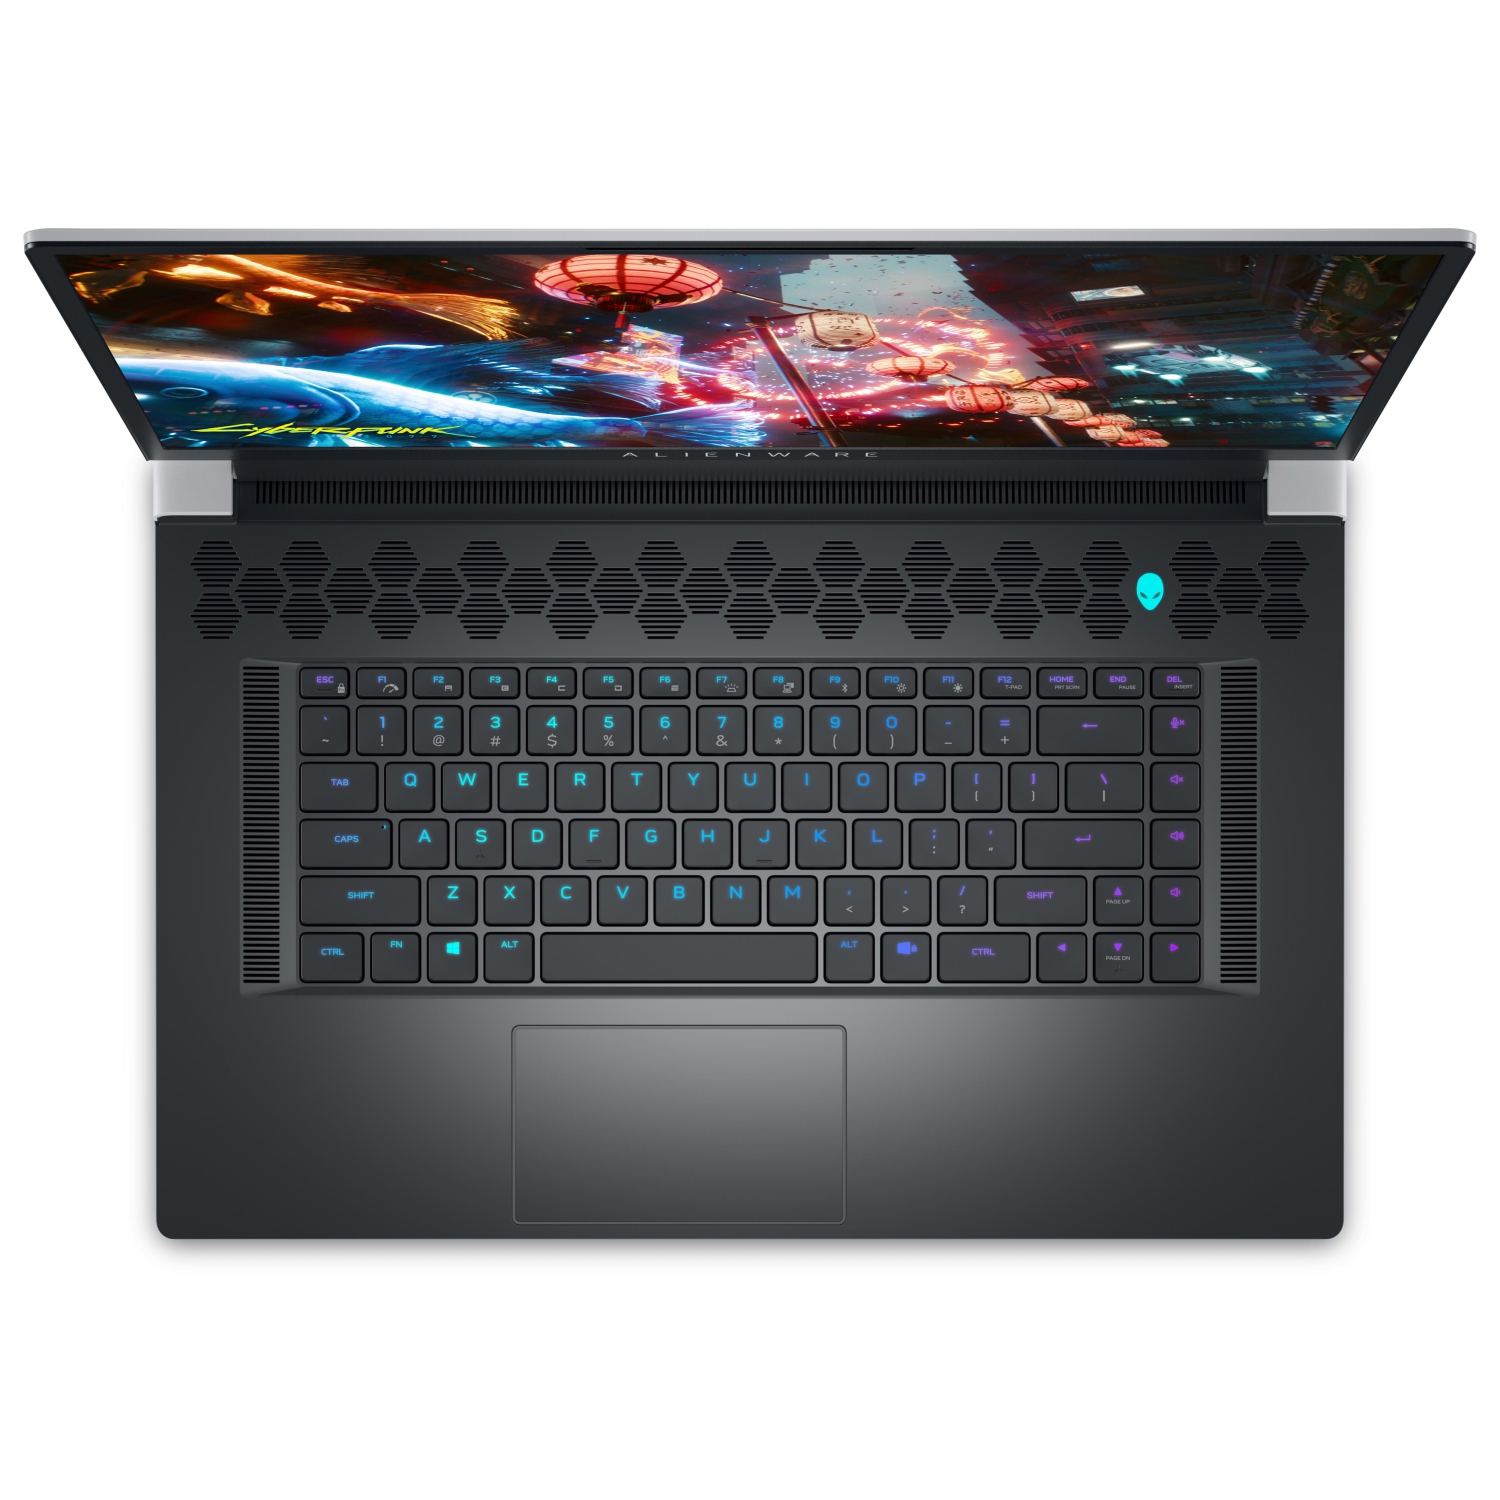 Refurbished (Excellent) – Dell Alienware X17 R2 Gaming Laptop (2022) | 17.3" FHD | Core i9 - 512GB SSD - 16GB RAM - 3080 Ti | 14 Cores @ 5 GHz - 12th Gen CPU - 16GB GDDR6X